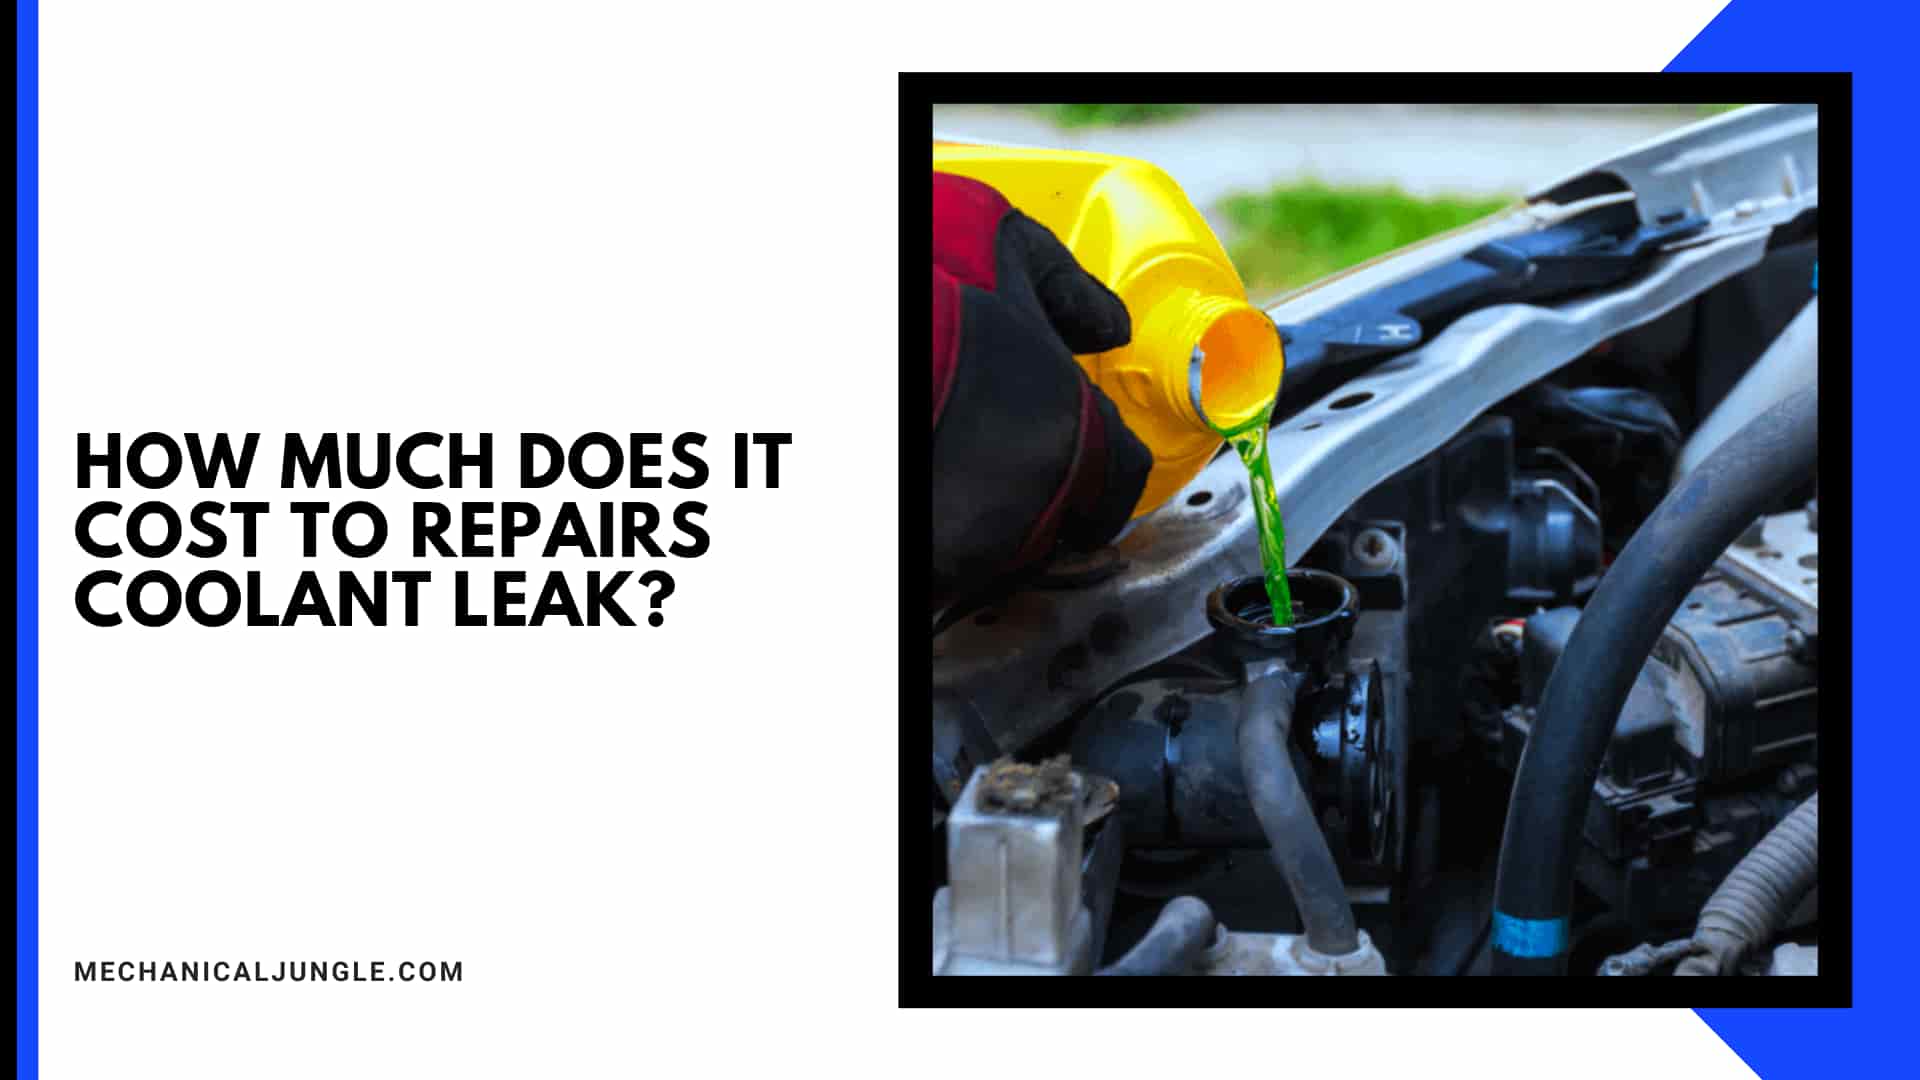 How Much Does It Cost to Repairs Coolant Leak?